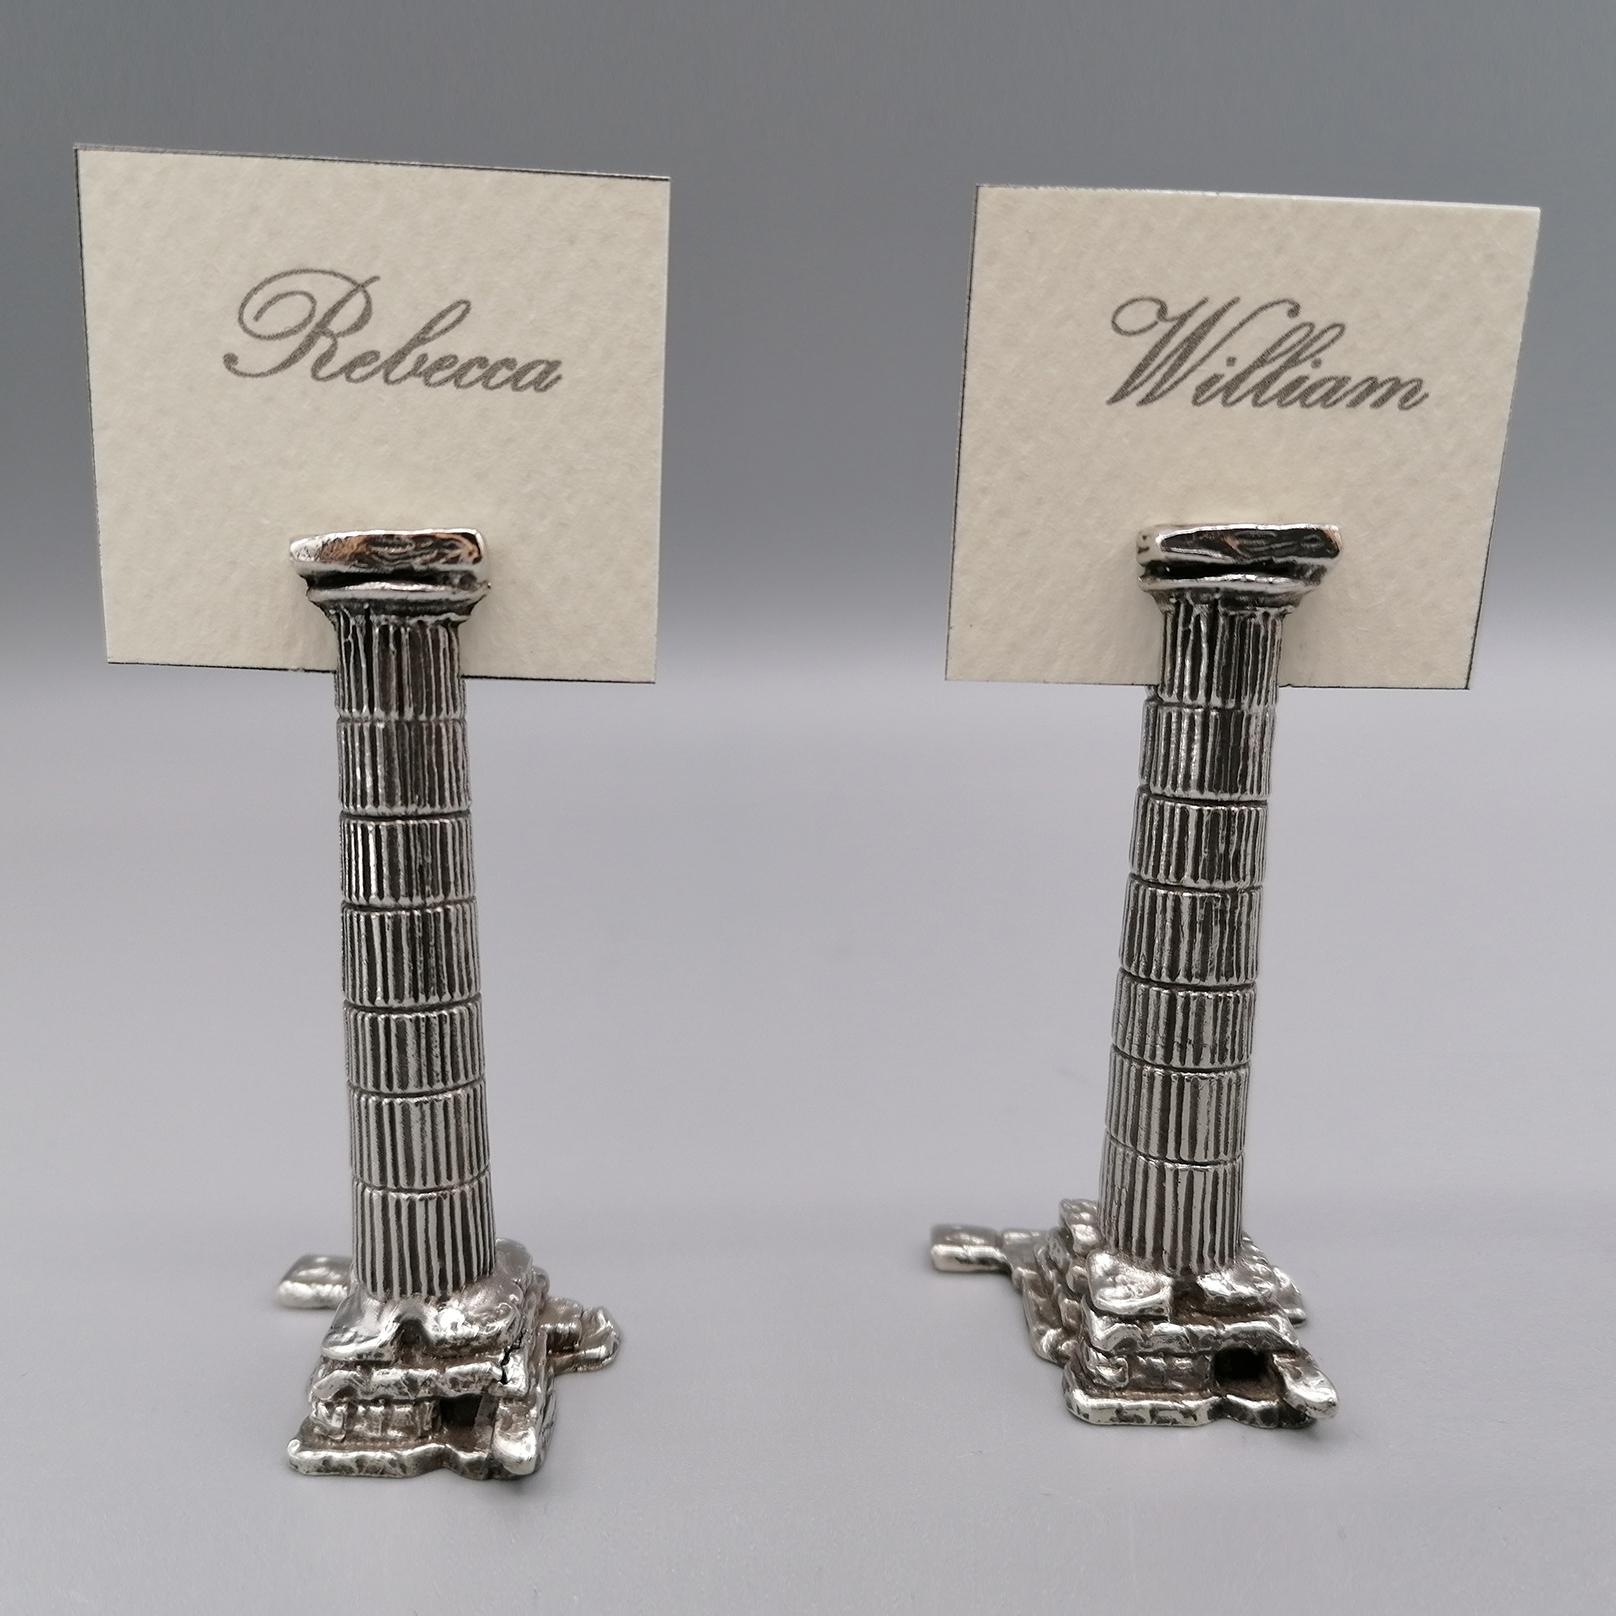 12 table place card in sterling silver.
They are made in fusion and engraving finishing, as a copy of the Roman columns as can be admired in the Roman Forum in Rome.
Silver Art - Alessandria - Italy which later incorparated by Arval Argenti